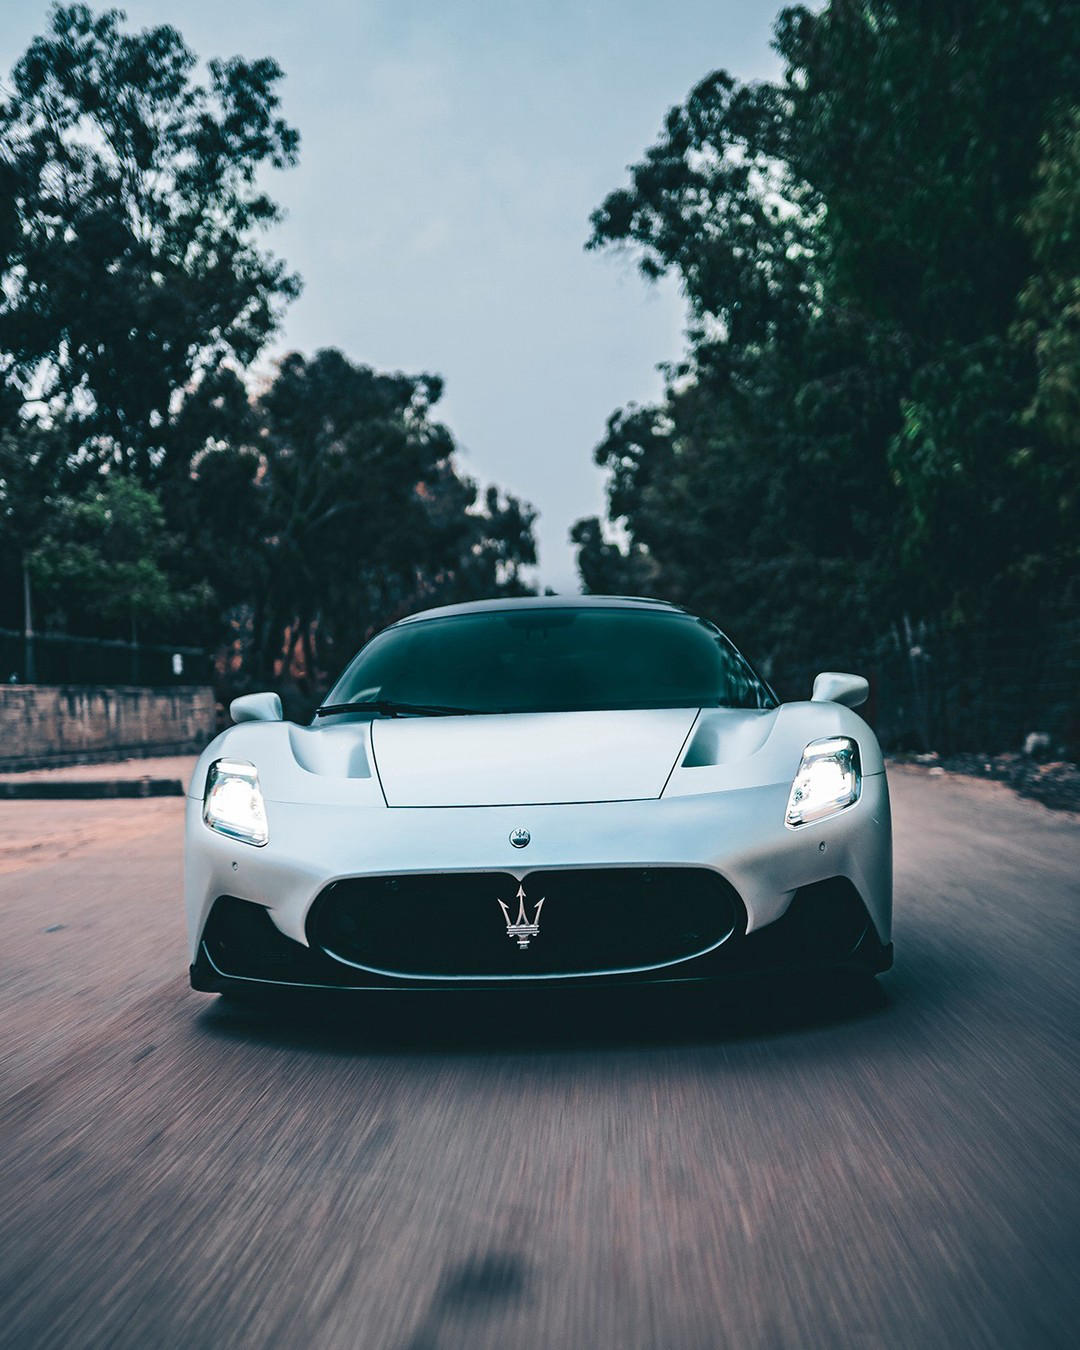 Maserati - Sometimes you only need an empty road and your #MaseratiMC20